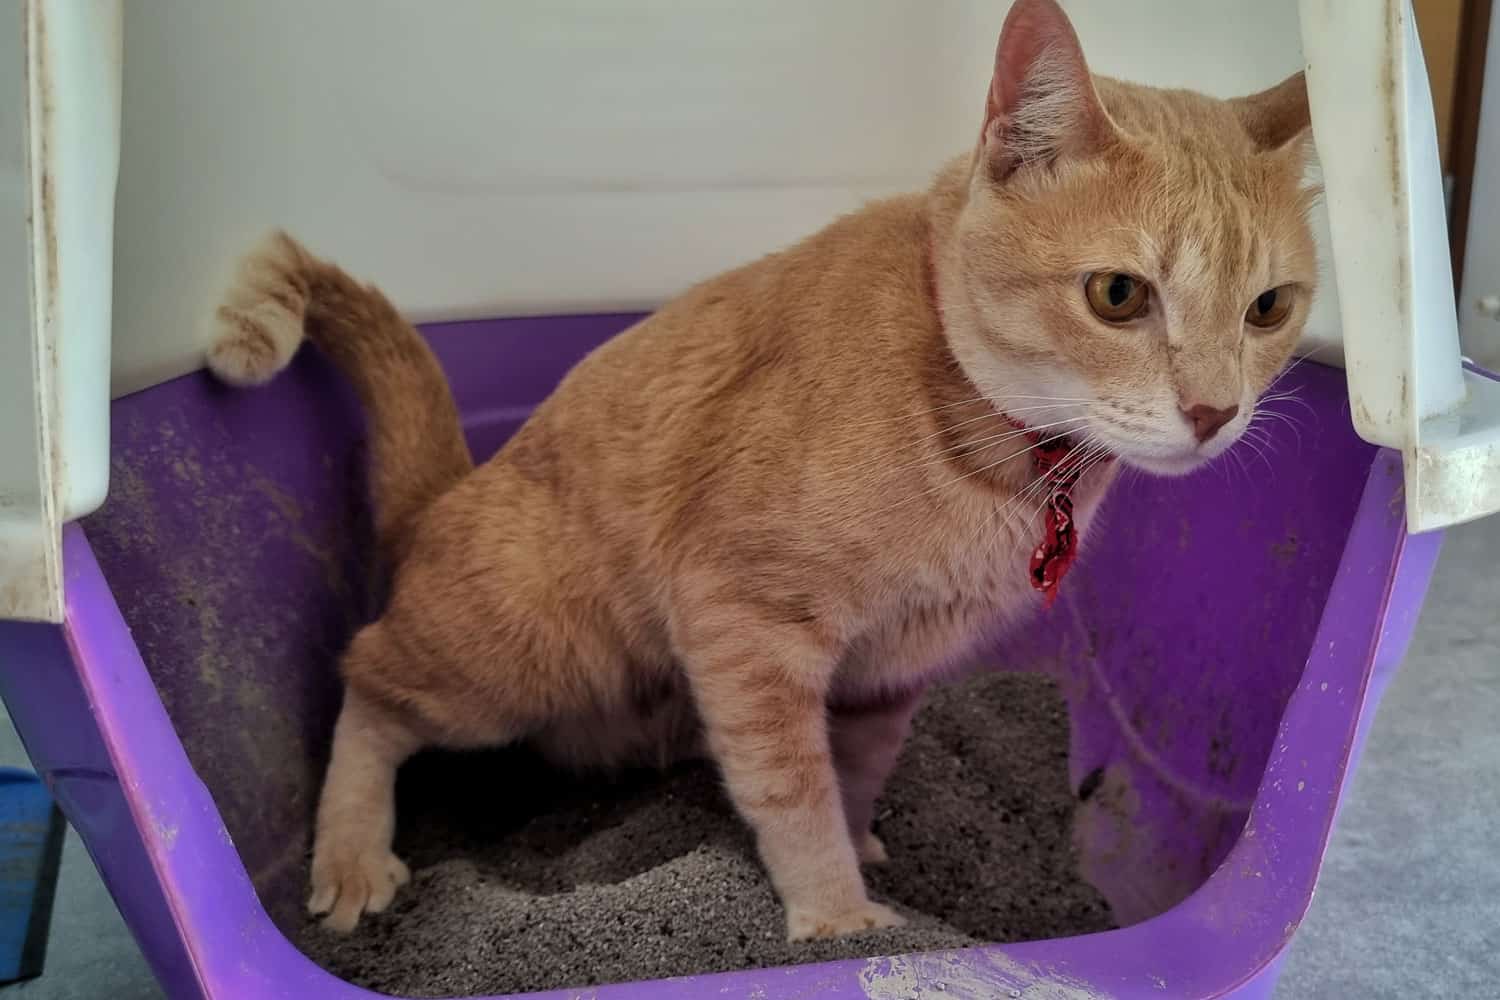 A ginger cat is experiencing diarrhea and using a violet-colored litter box